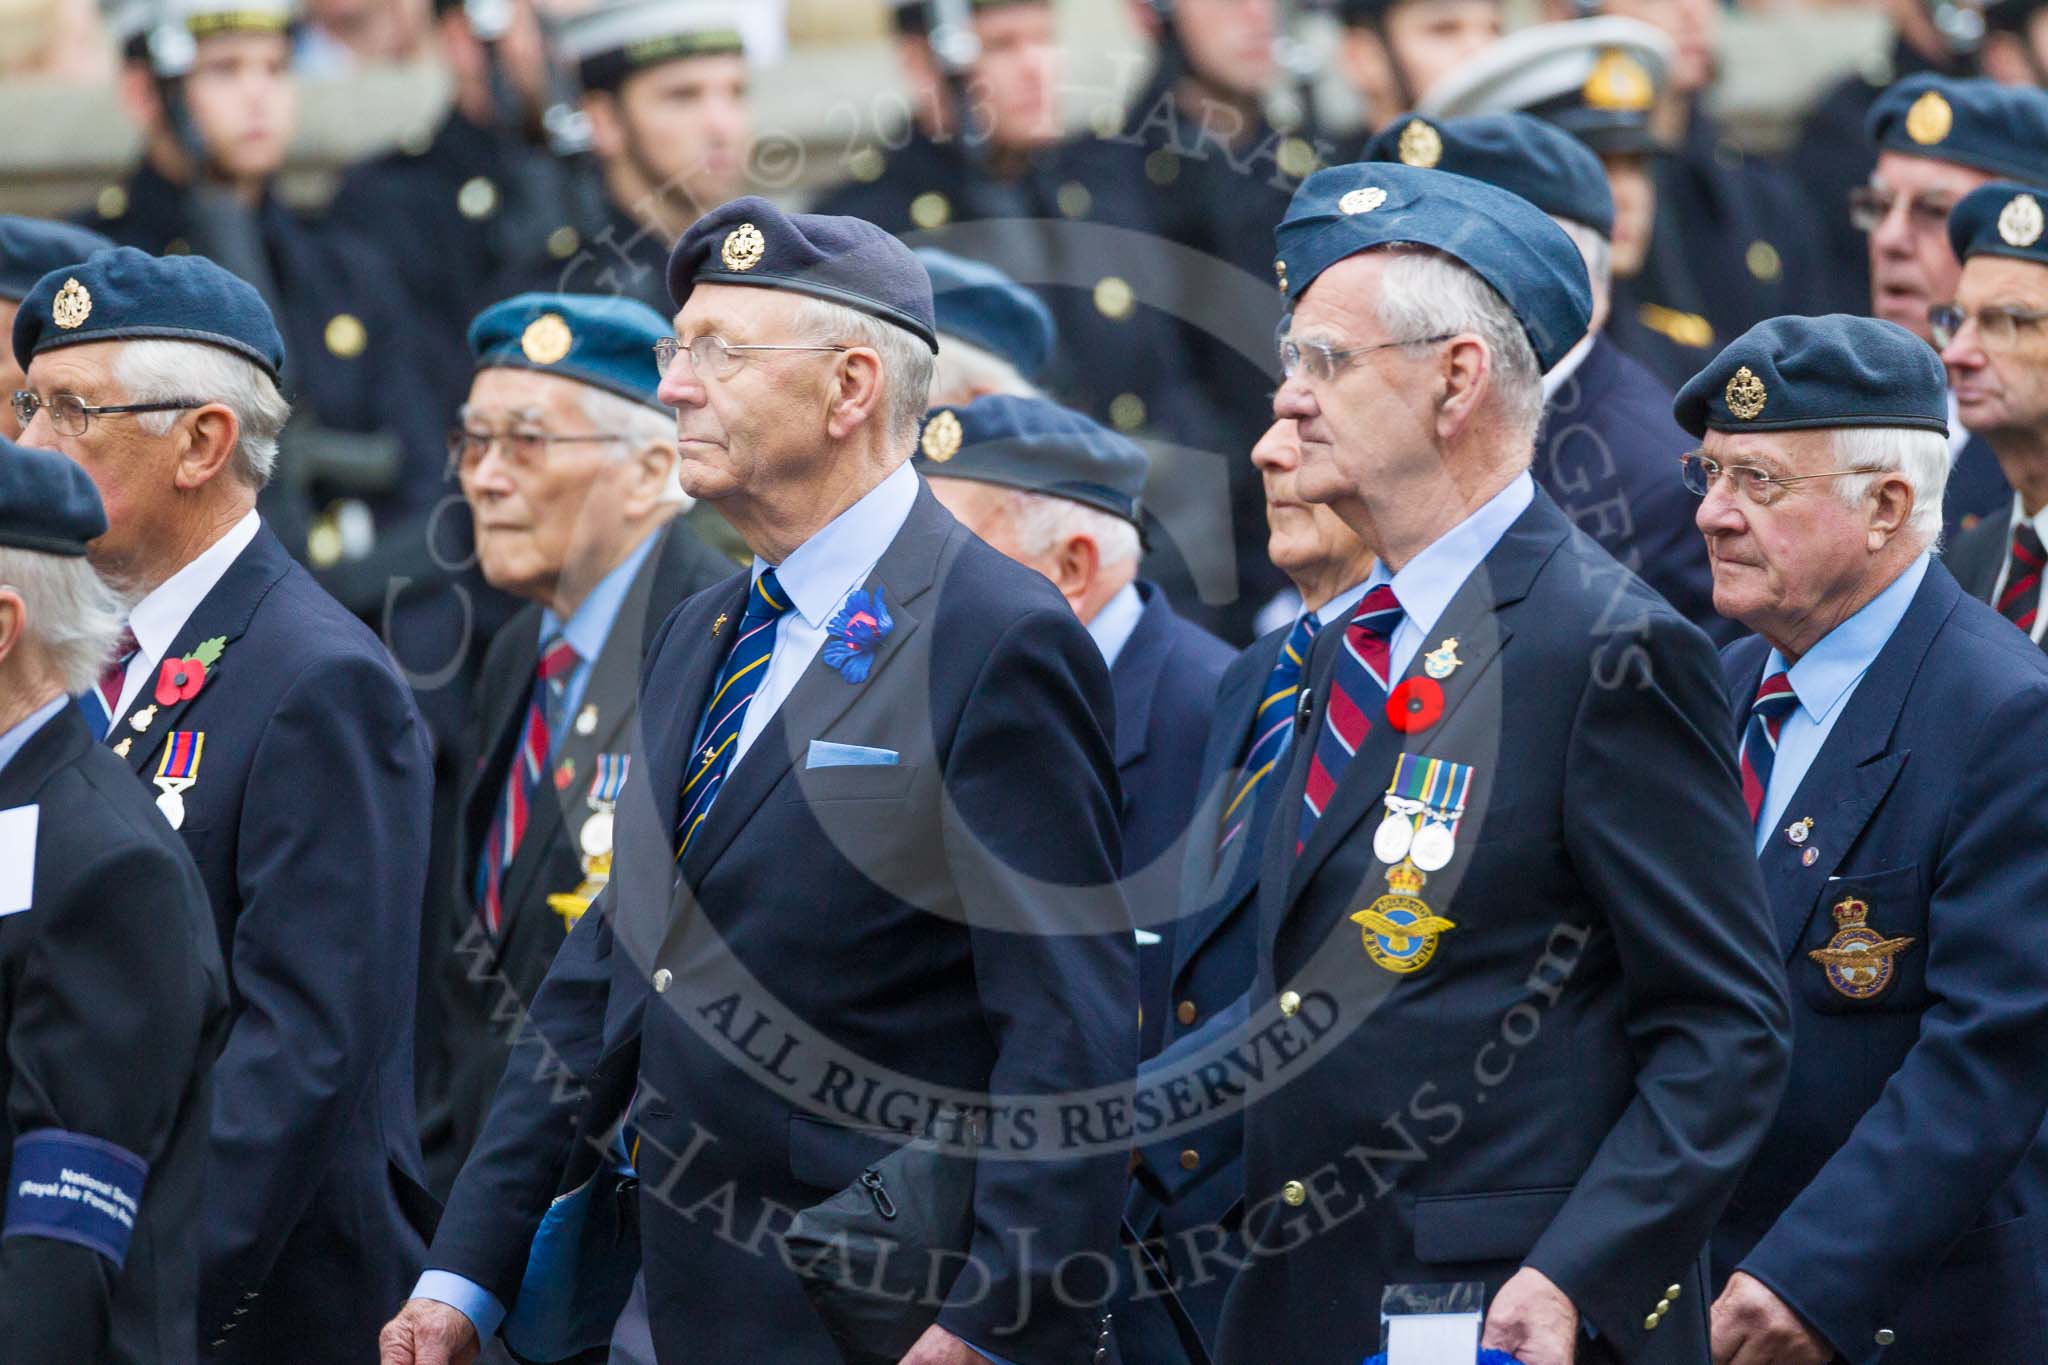 Remembrance Sunday at the Cenotaph 2015: Group C5, National Service (Royal Air Force) Association.
Cenotaph, Whitehall, London SW1,
London,
Greater London,
United Kingdom,
on 08 November 2015 at 11:48, image #459